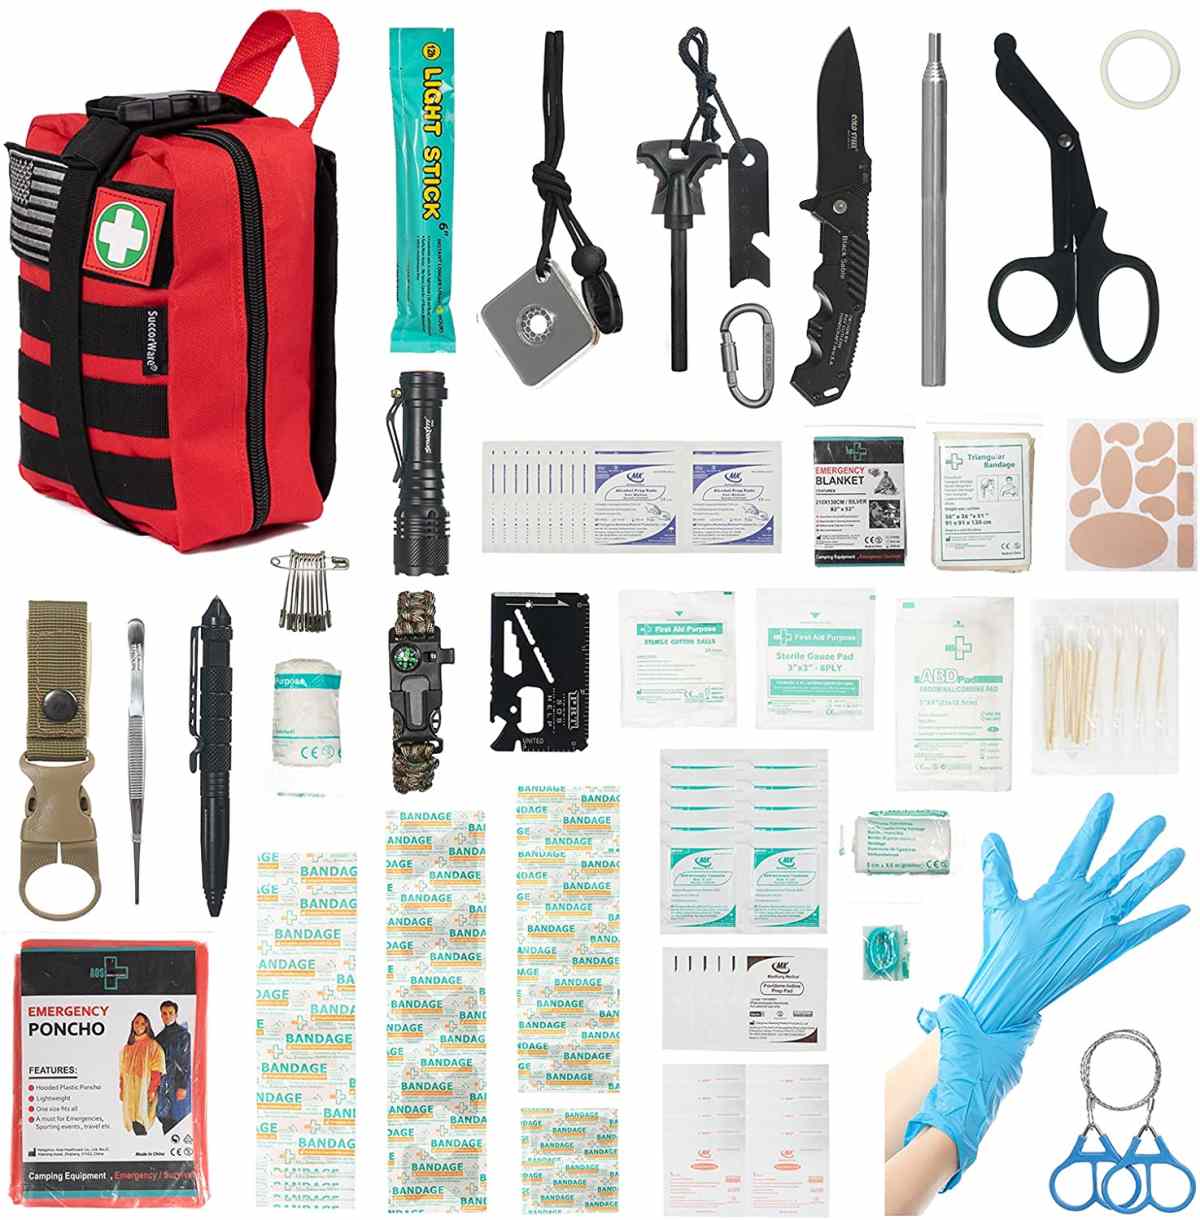 What are the benefits of First Aid Equipment?